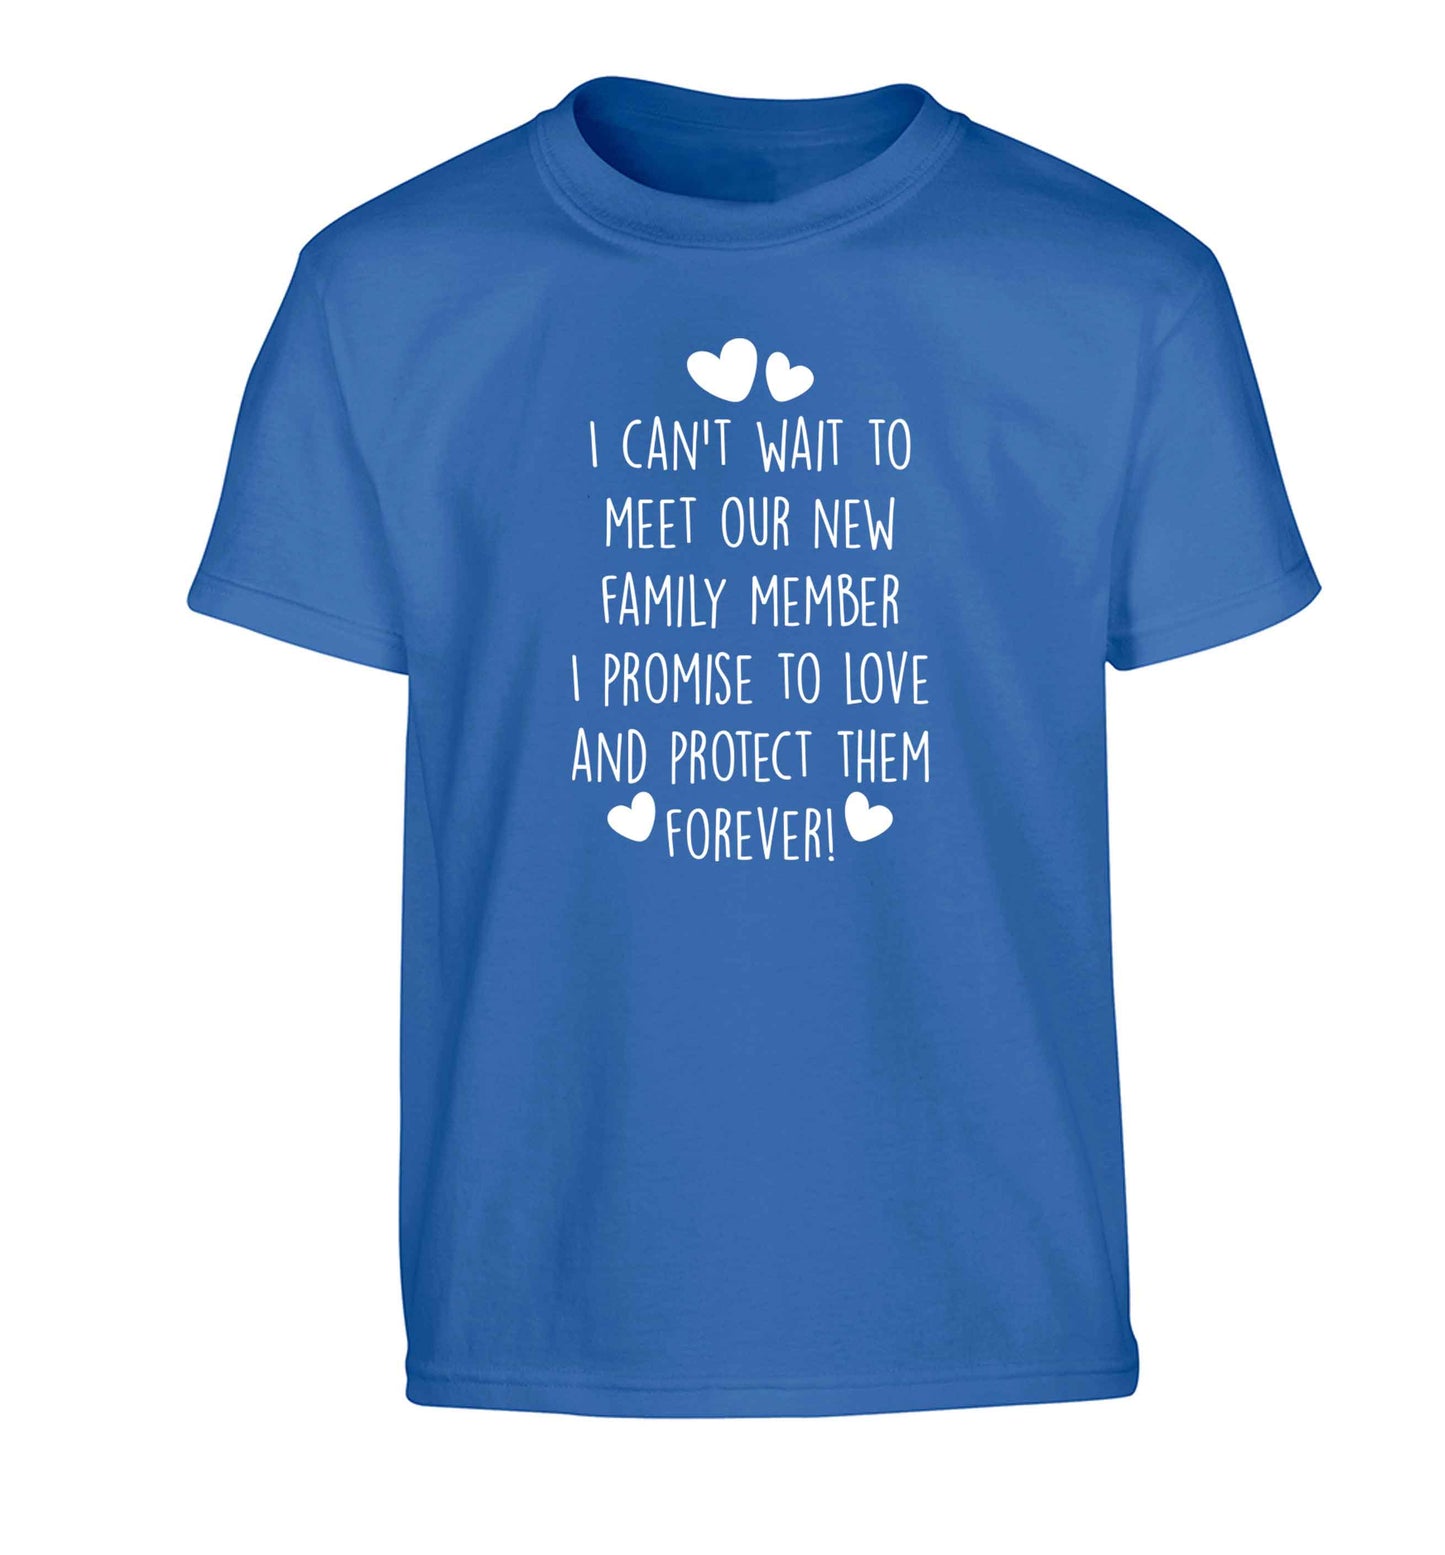 I can't wait to meet our new family member I promise to love and protect them foreverChildren's blue Tshirt 12-13 Years